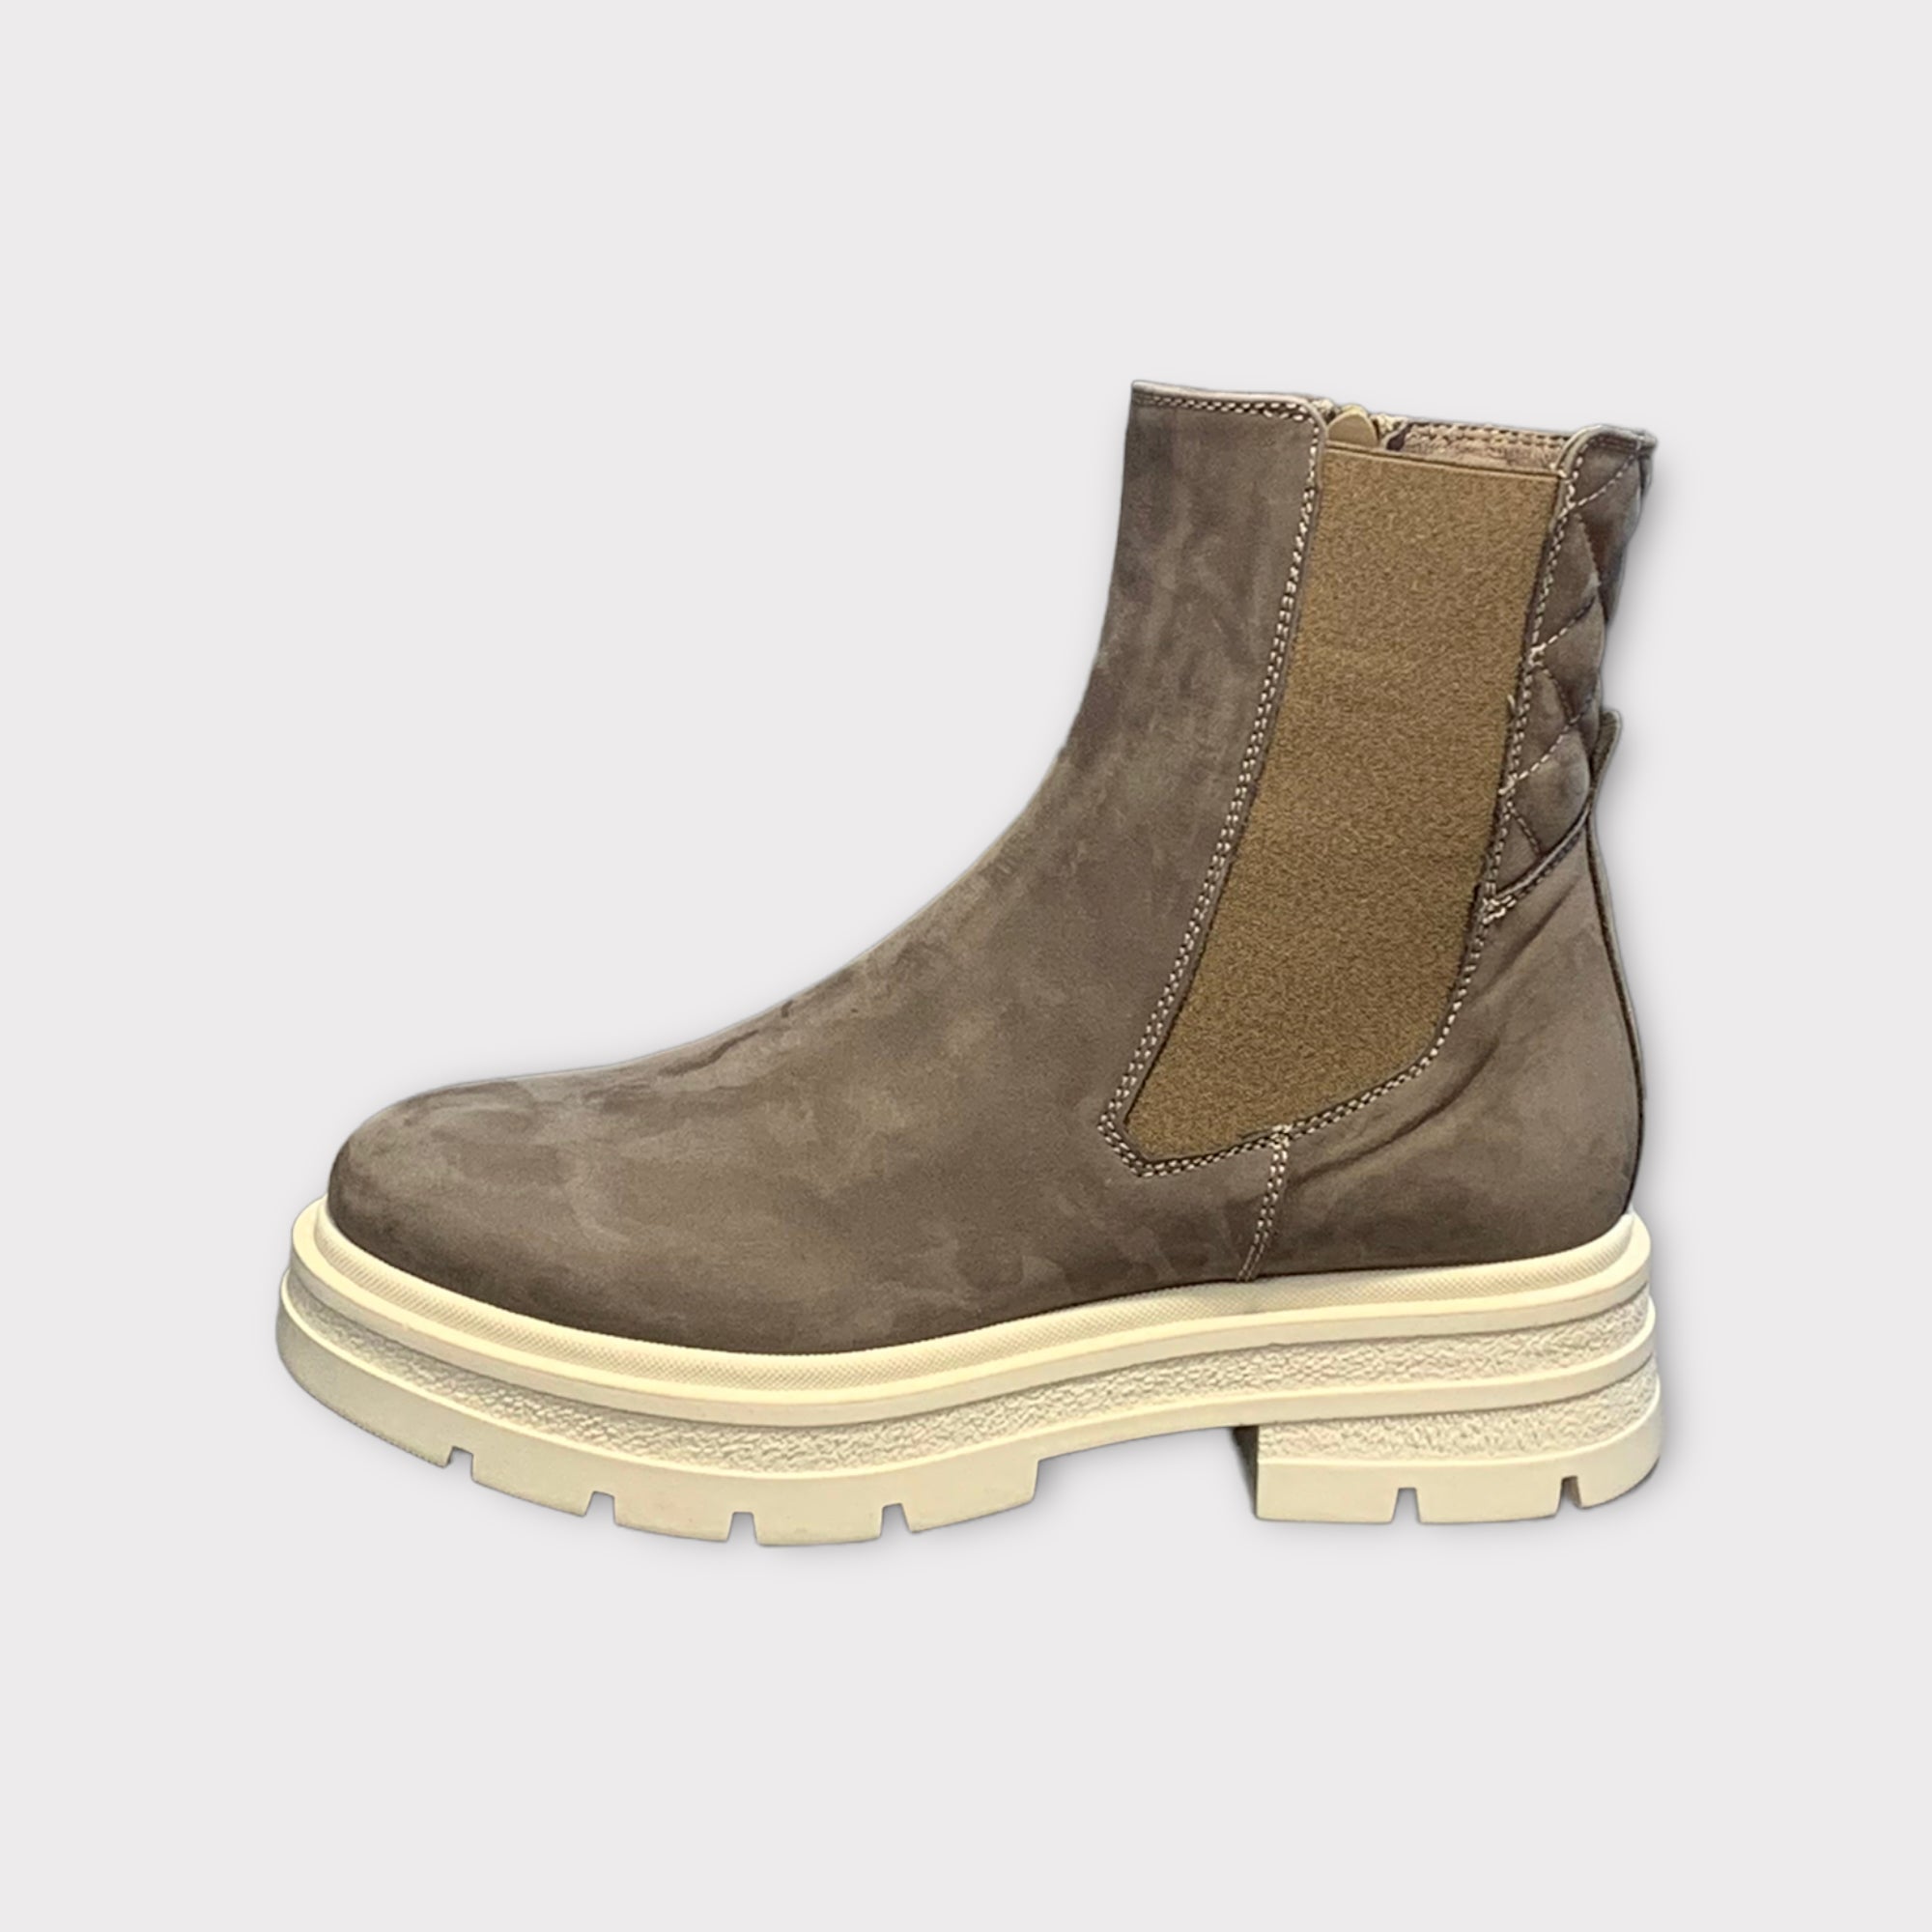 DL Sport Chelsea Boot Taupe